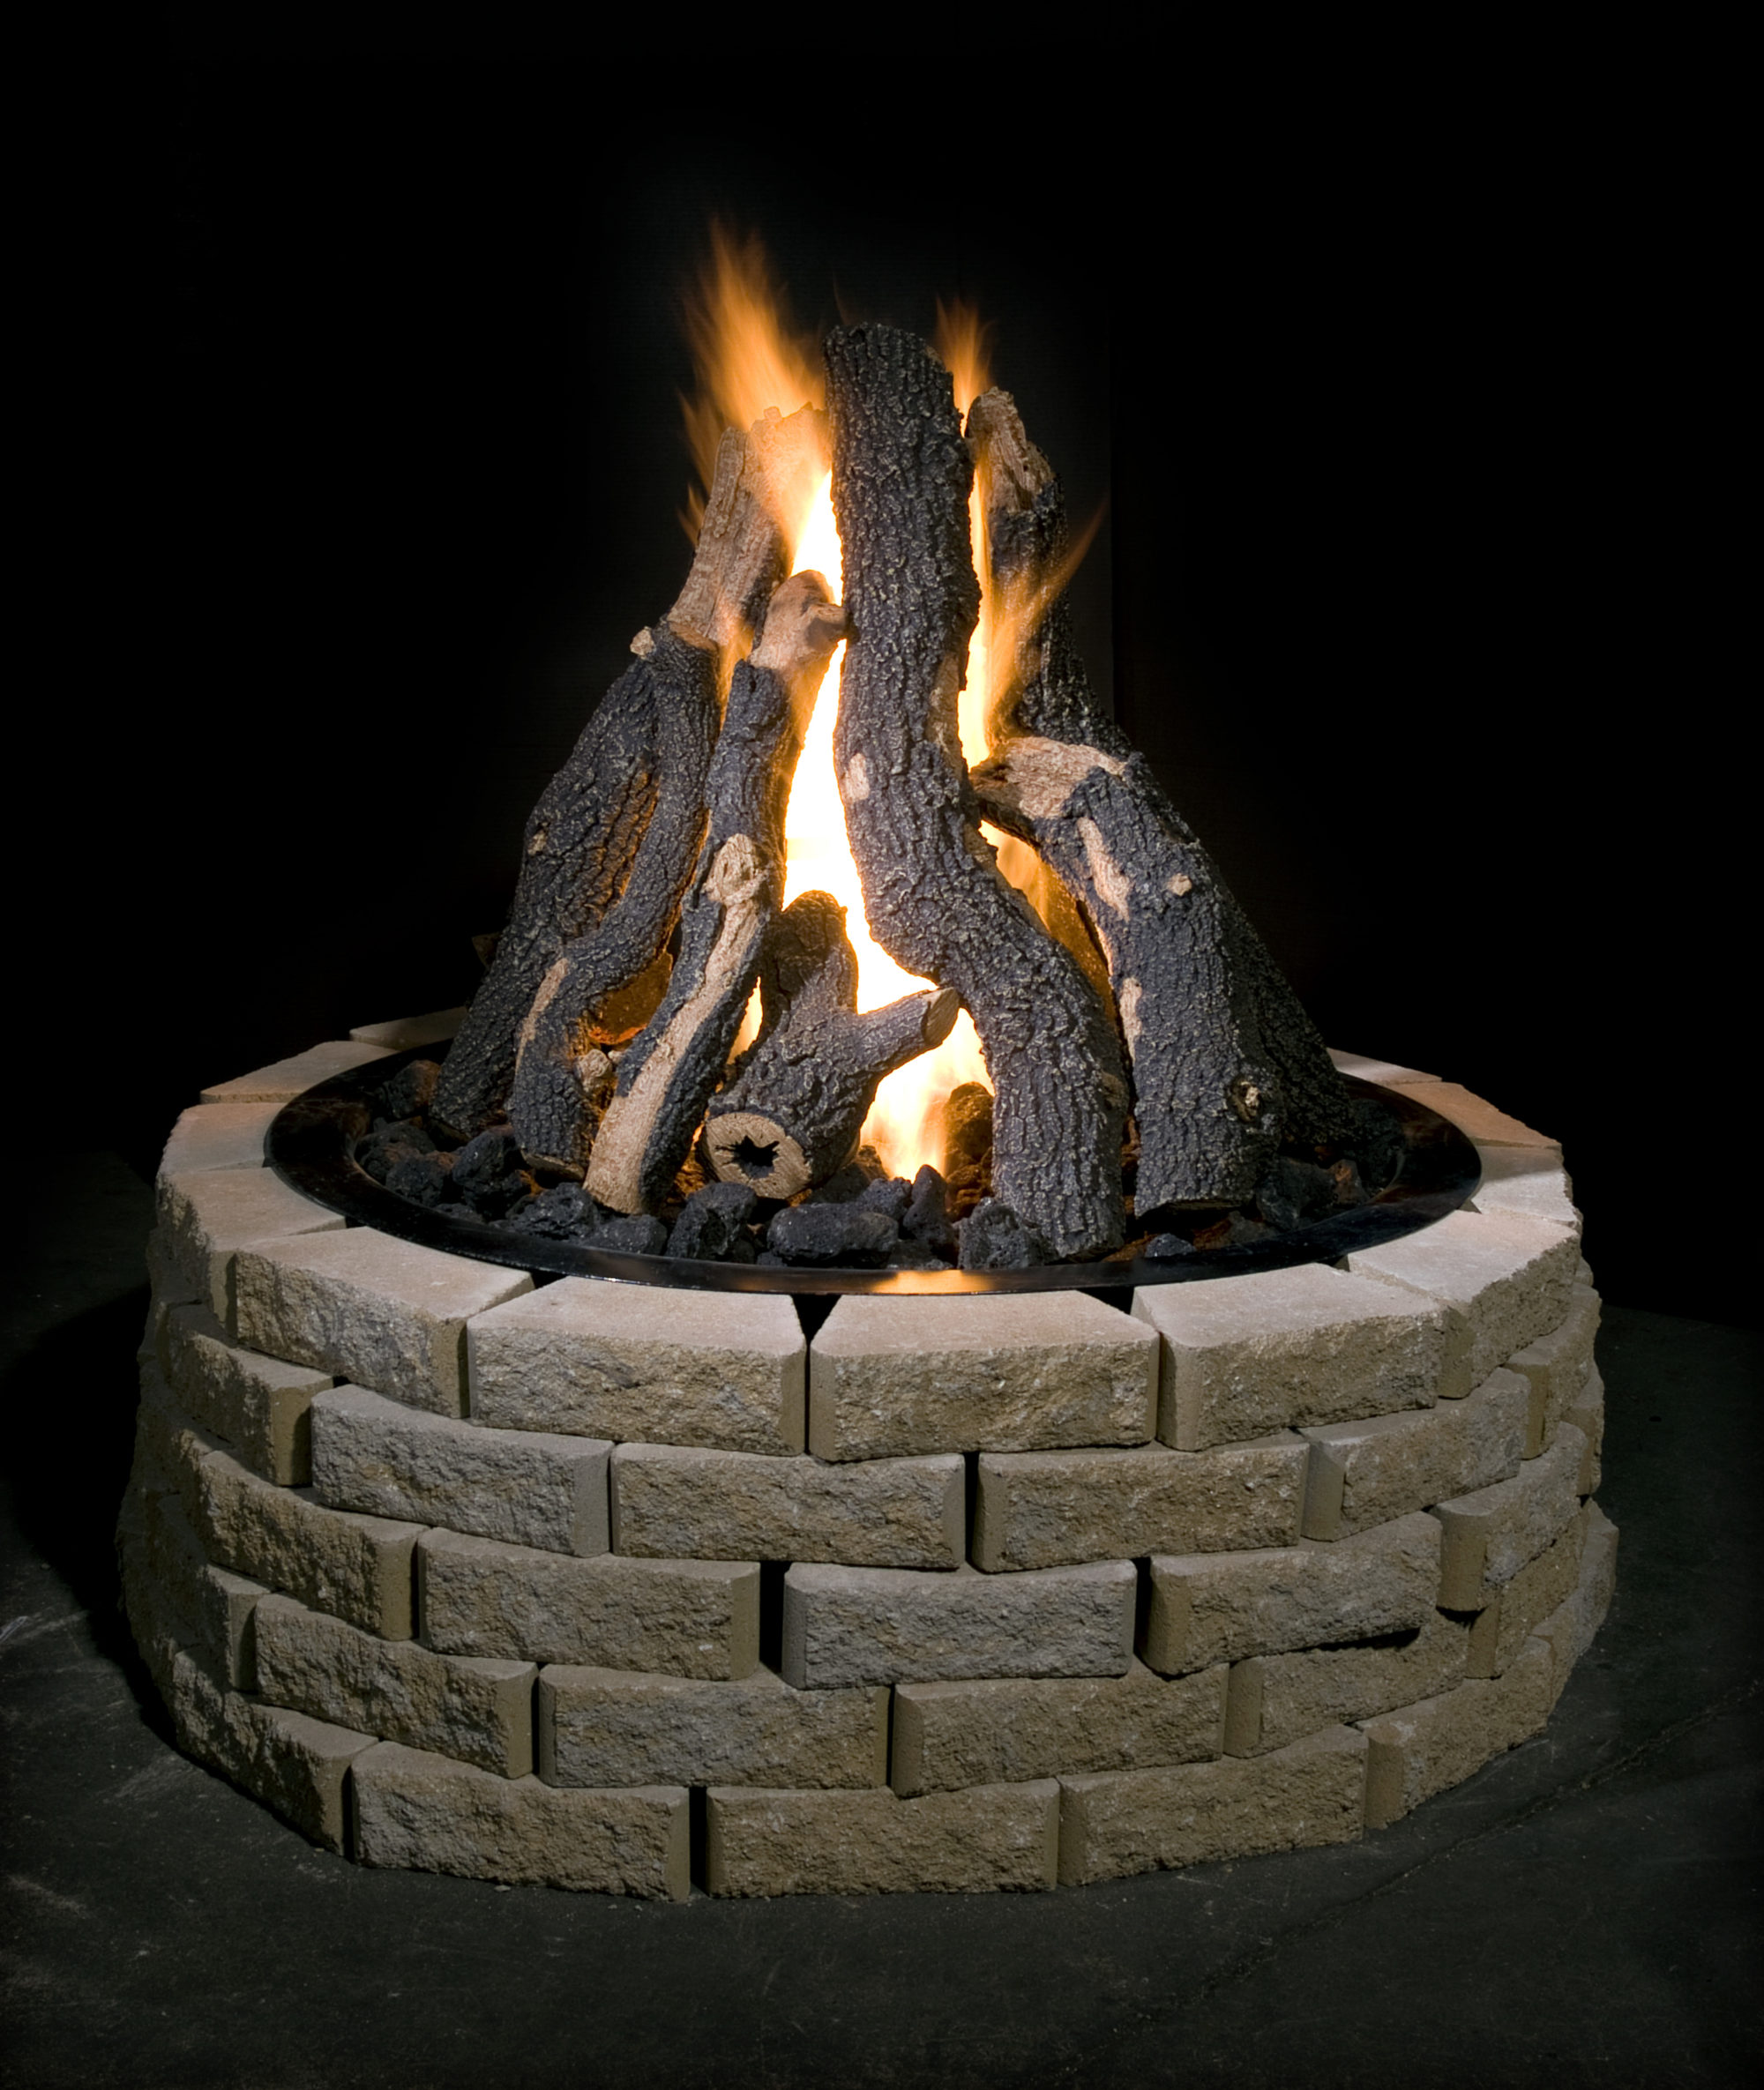 Outdoor Natural Gas Fire Pits Protech, Round 46 Hudson Stonetm Gas Fire Pit Kits